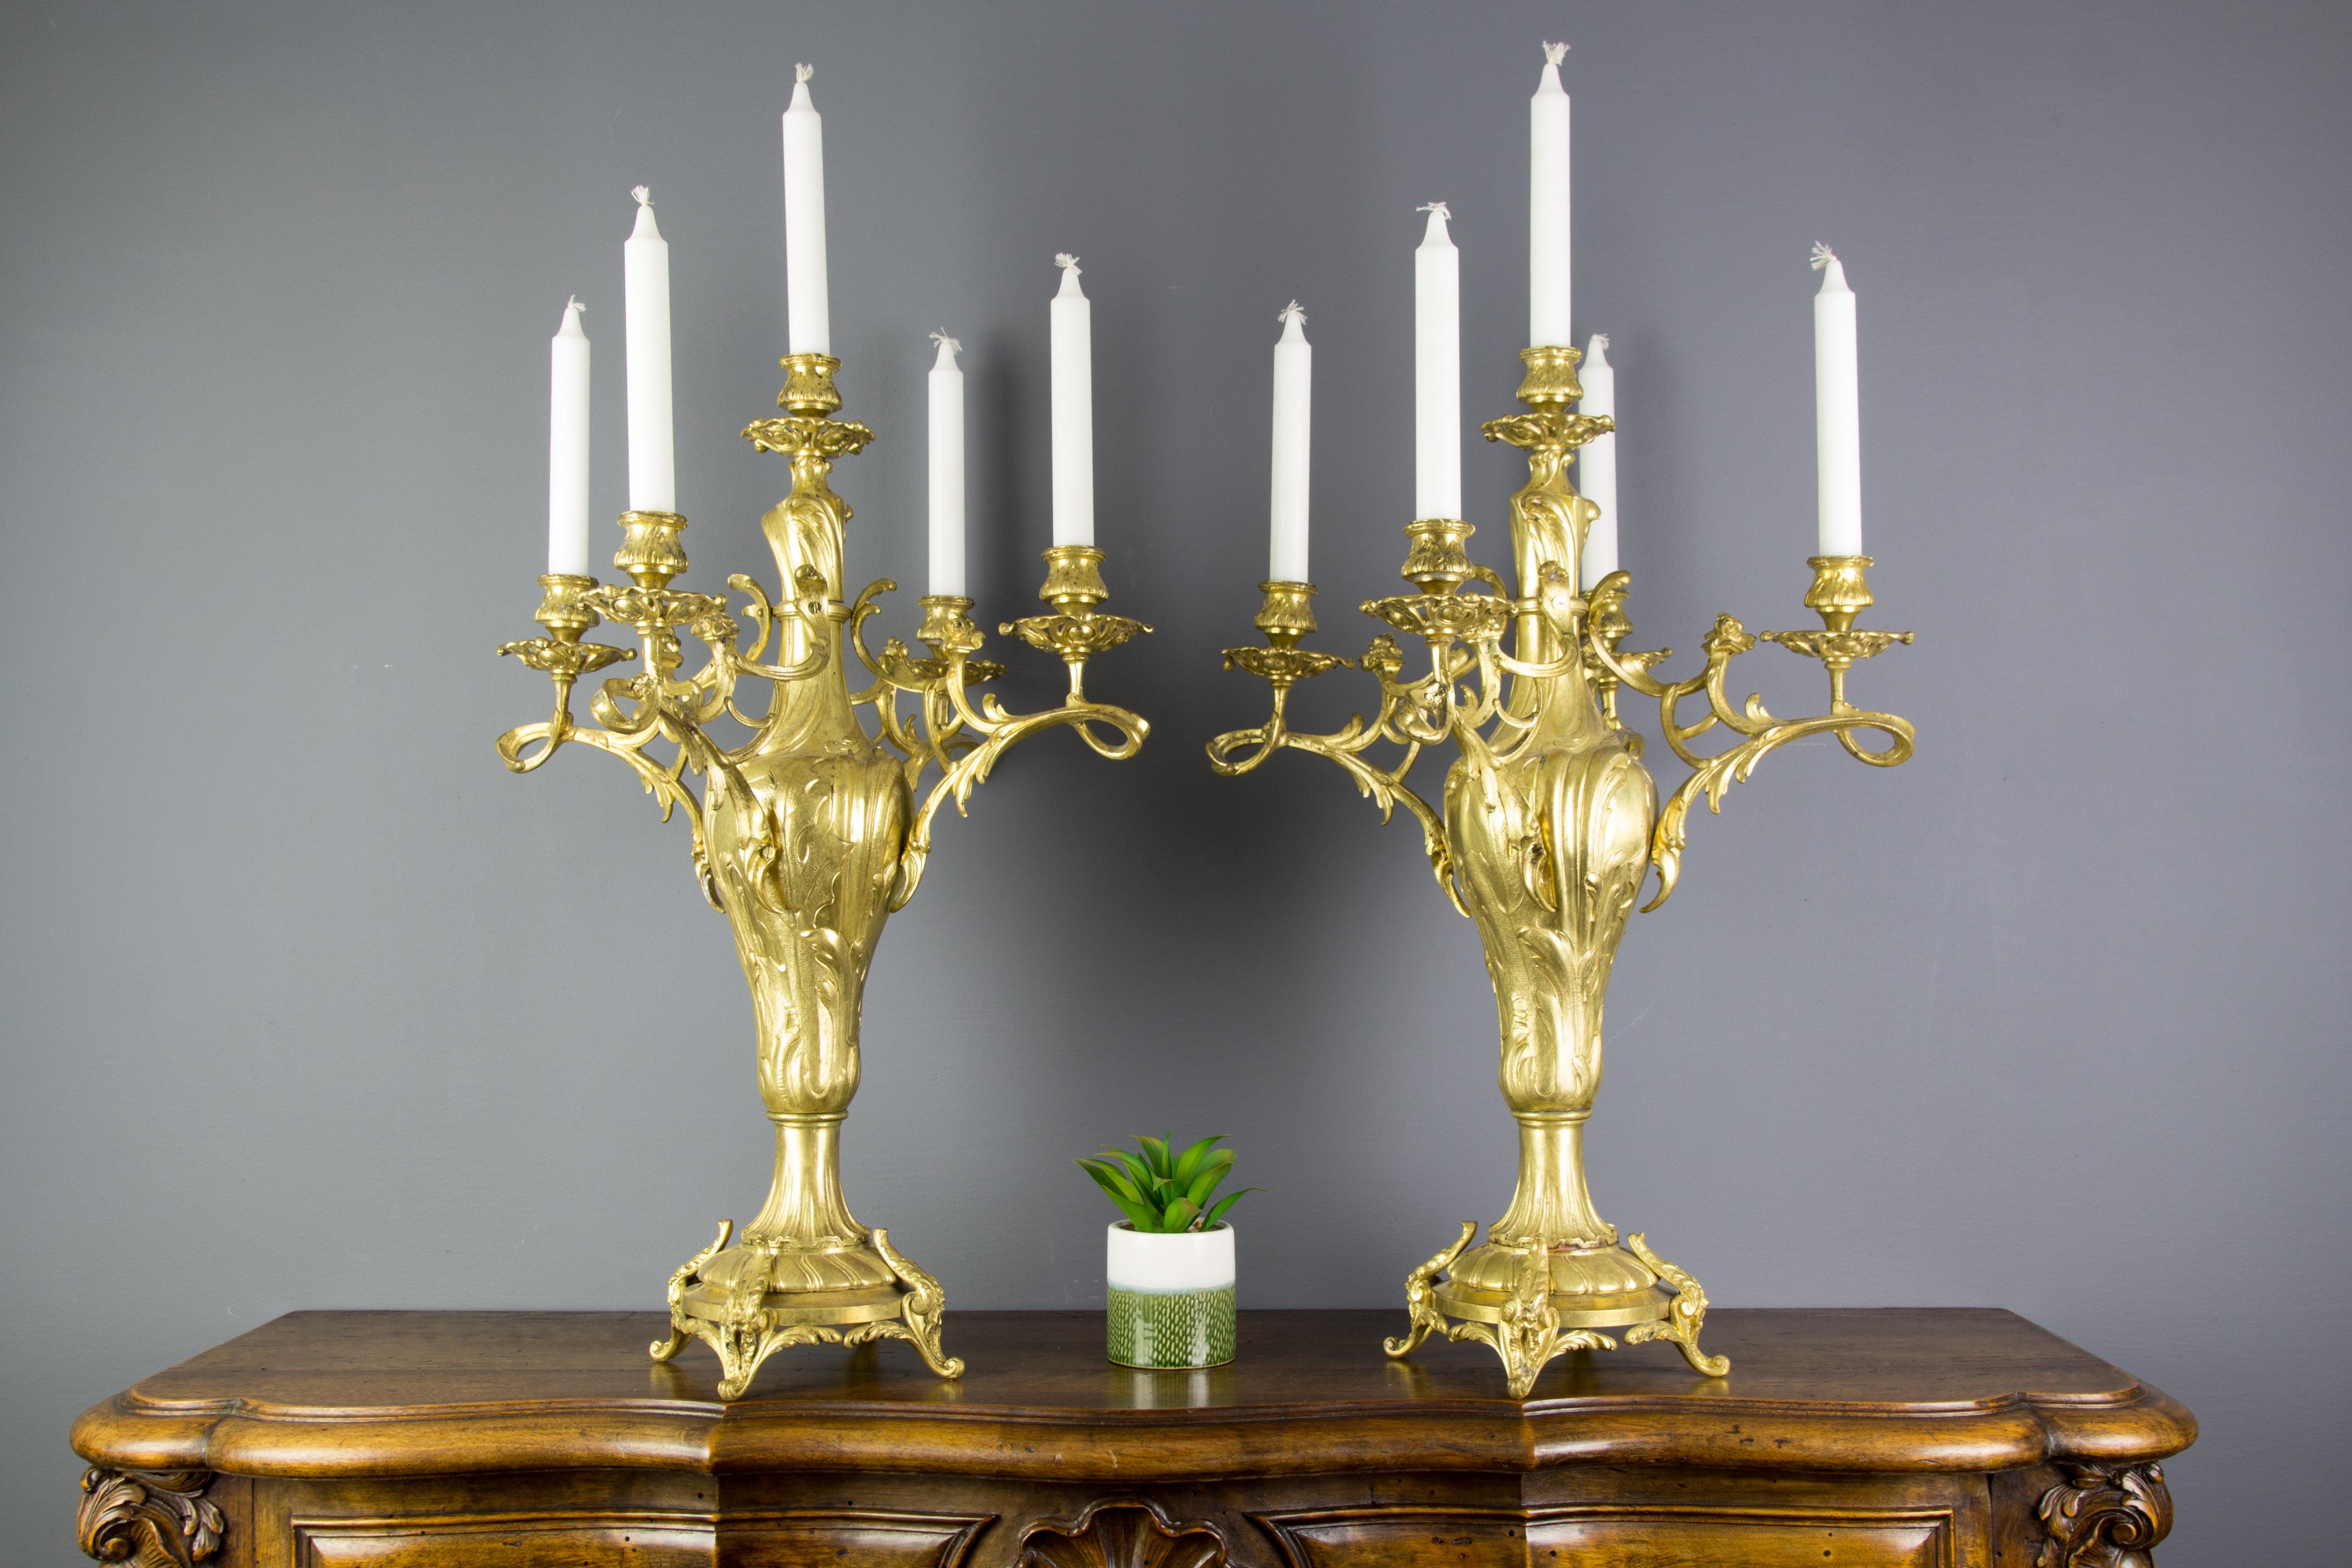 Large and impressive pair of Louis XV or Rococo style bronze five-light candelabras, France, 1920s.
Decorated with floral and scrolled leaf motif throughout.
Dimensions: Height 60 cm / 23.62 in, width 35 cm / 13.77 in, depth 35 cm / 13.77 in.